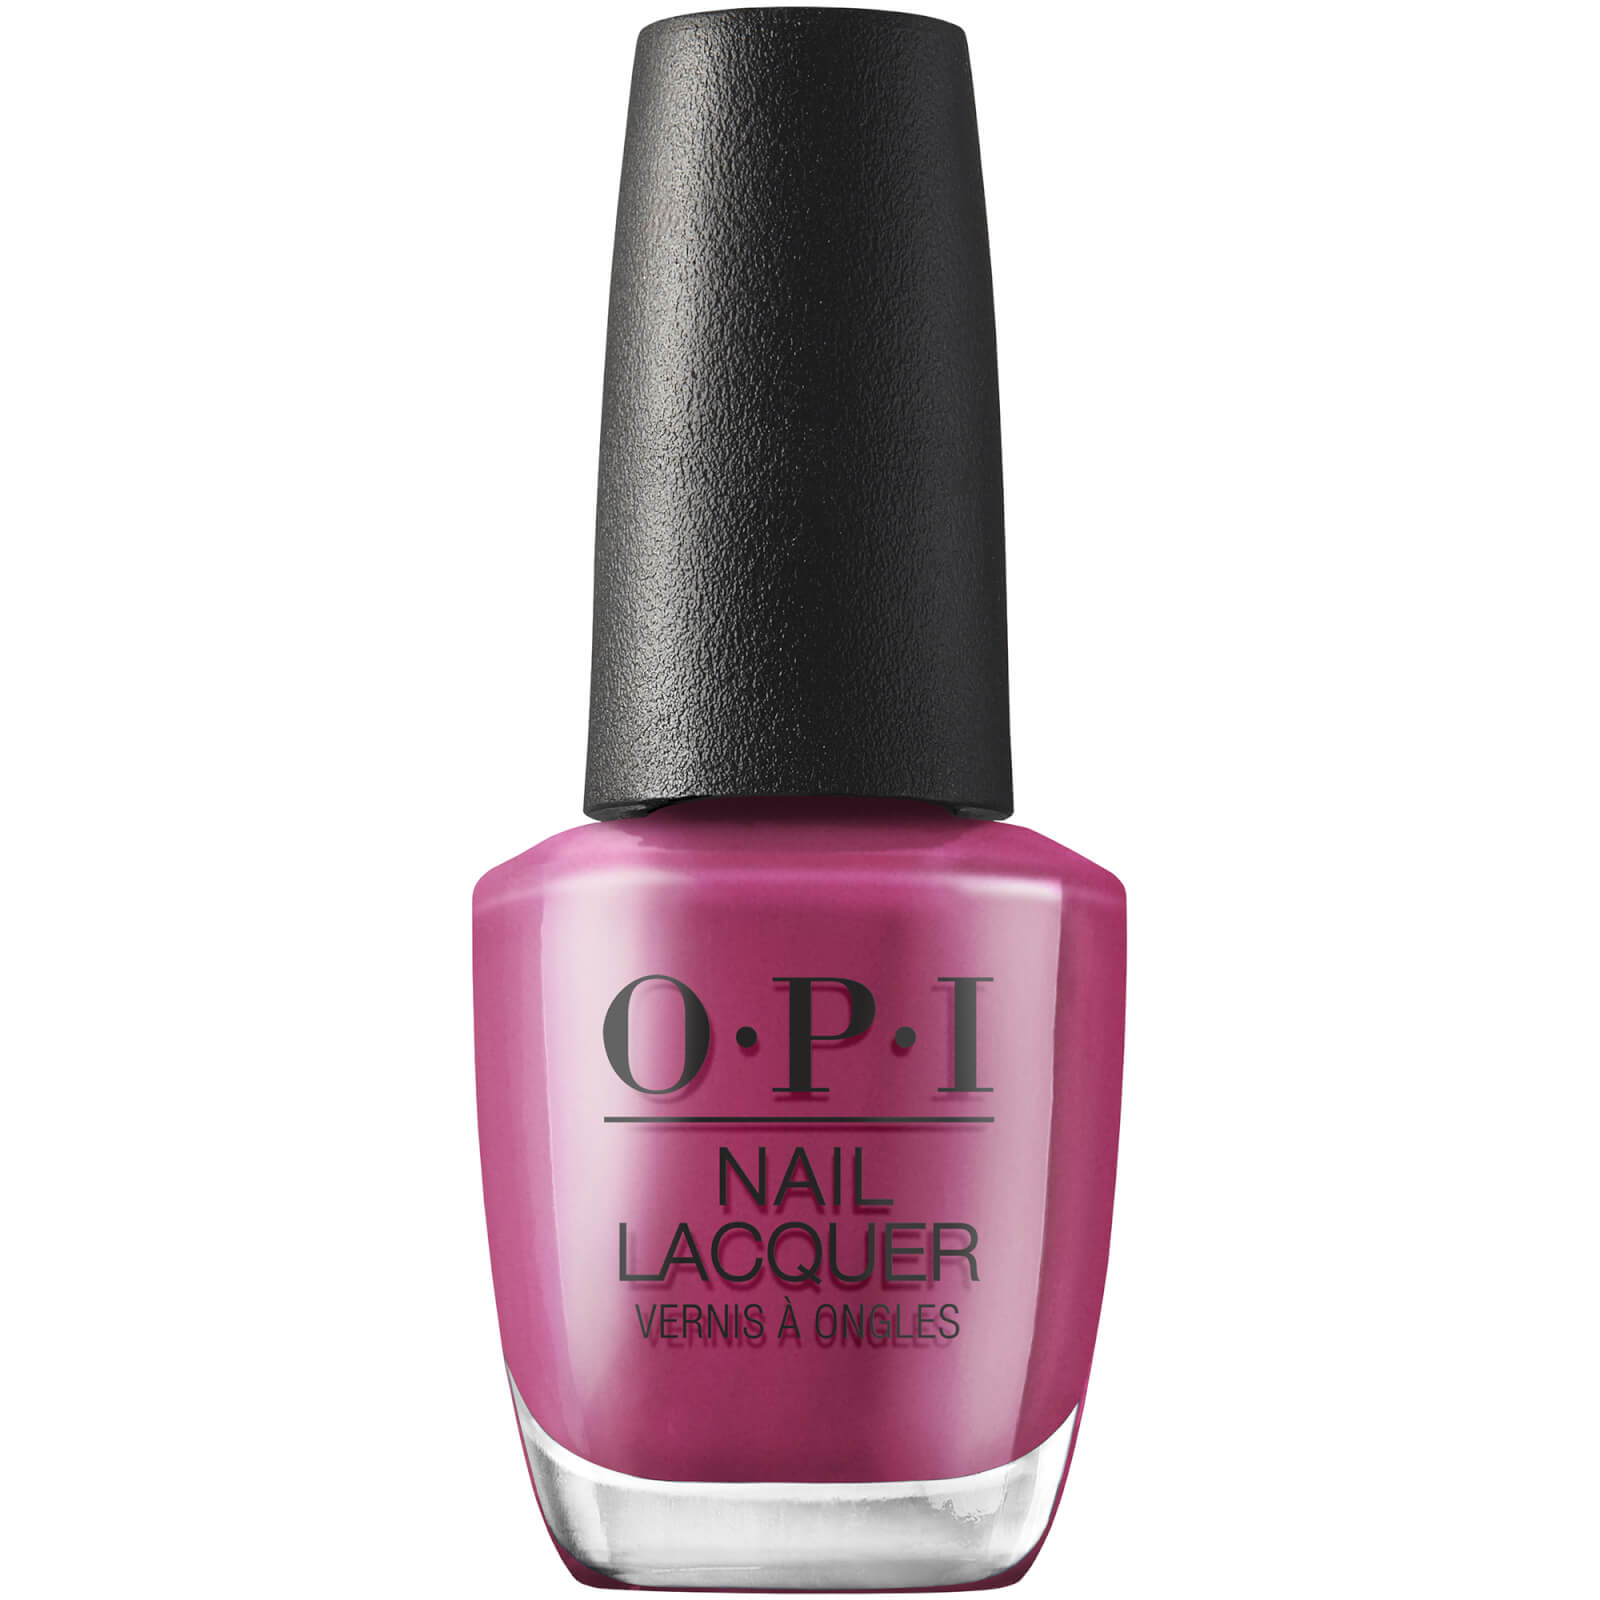 Opi Jewel Be Bold Collection Nail Lacquer 15ml (various Shades) - Feelin' Berry Glam